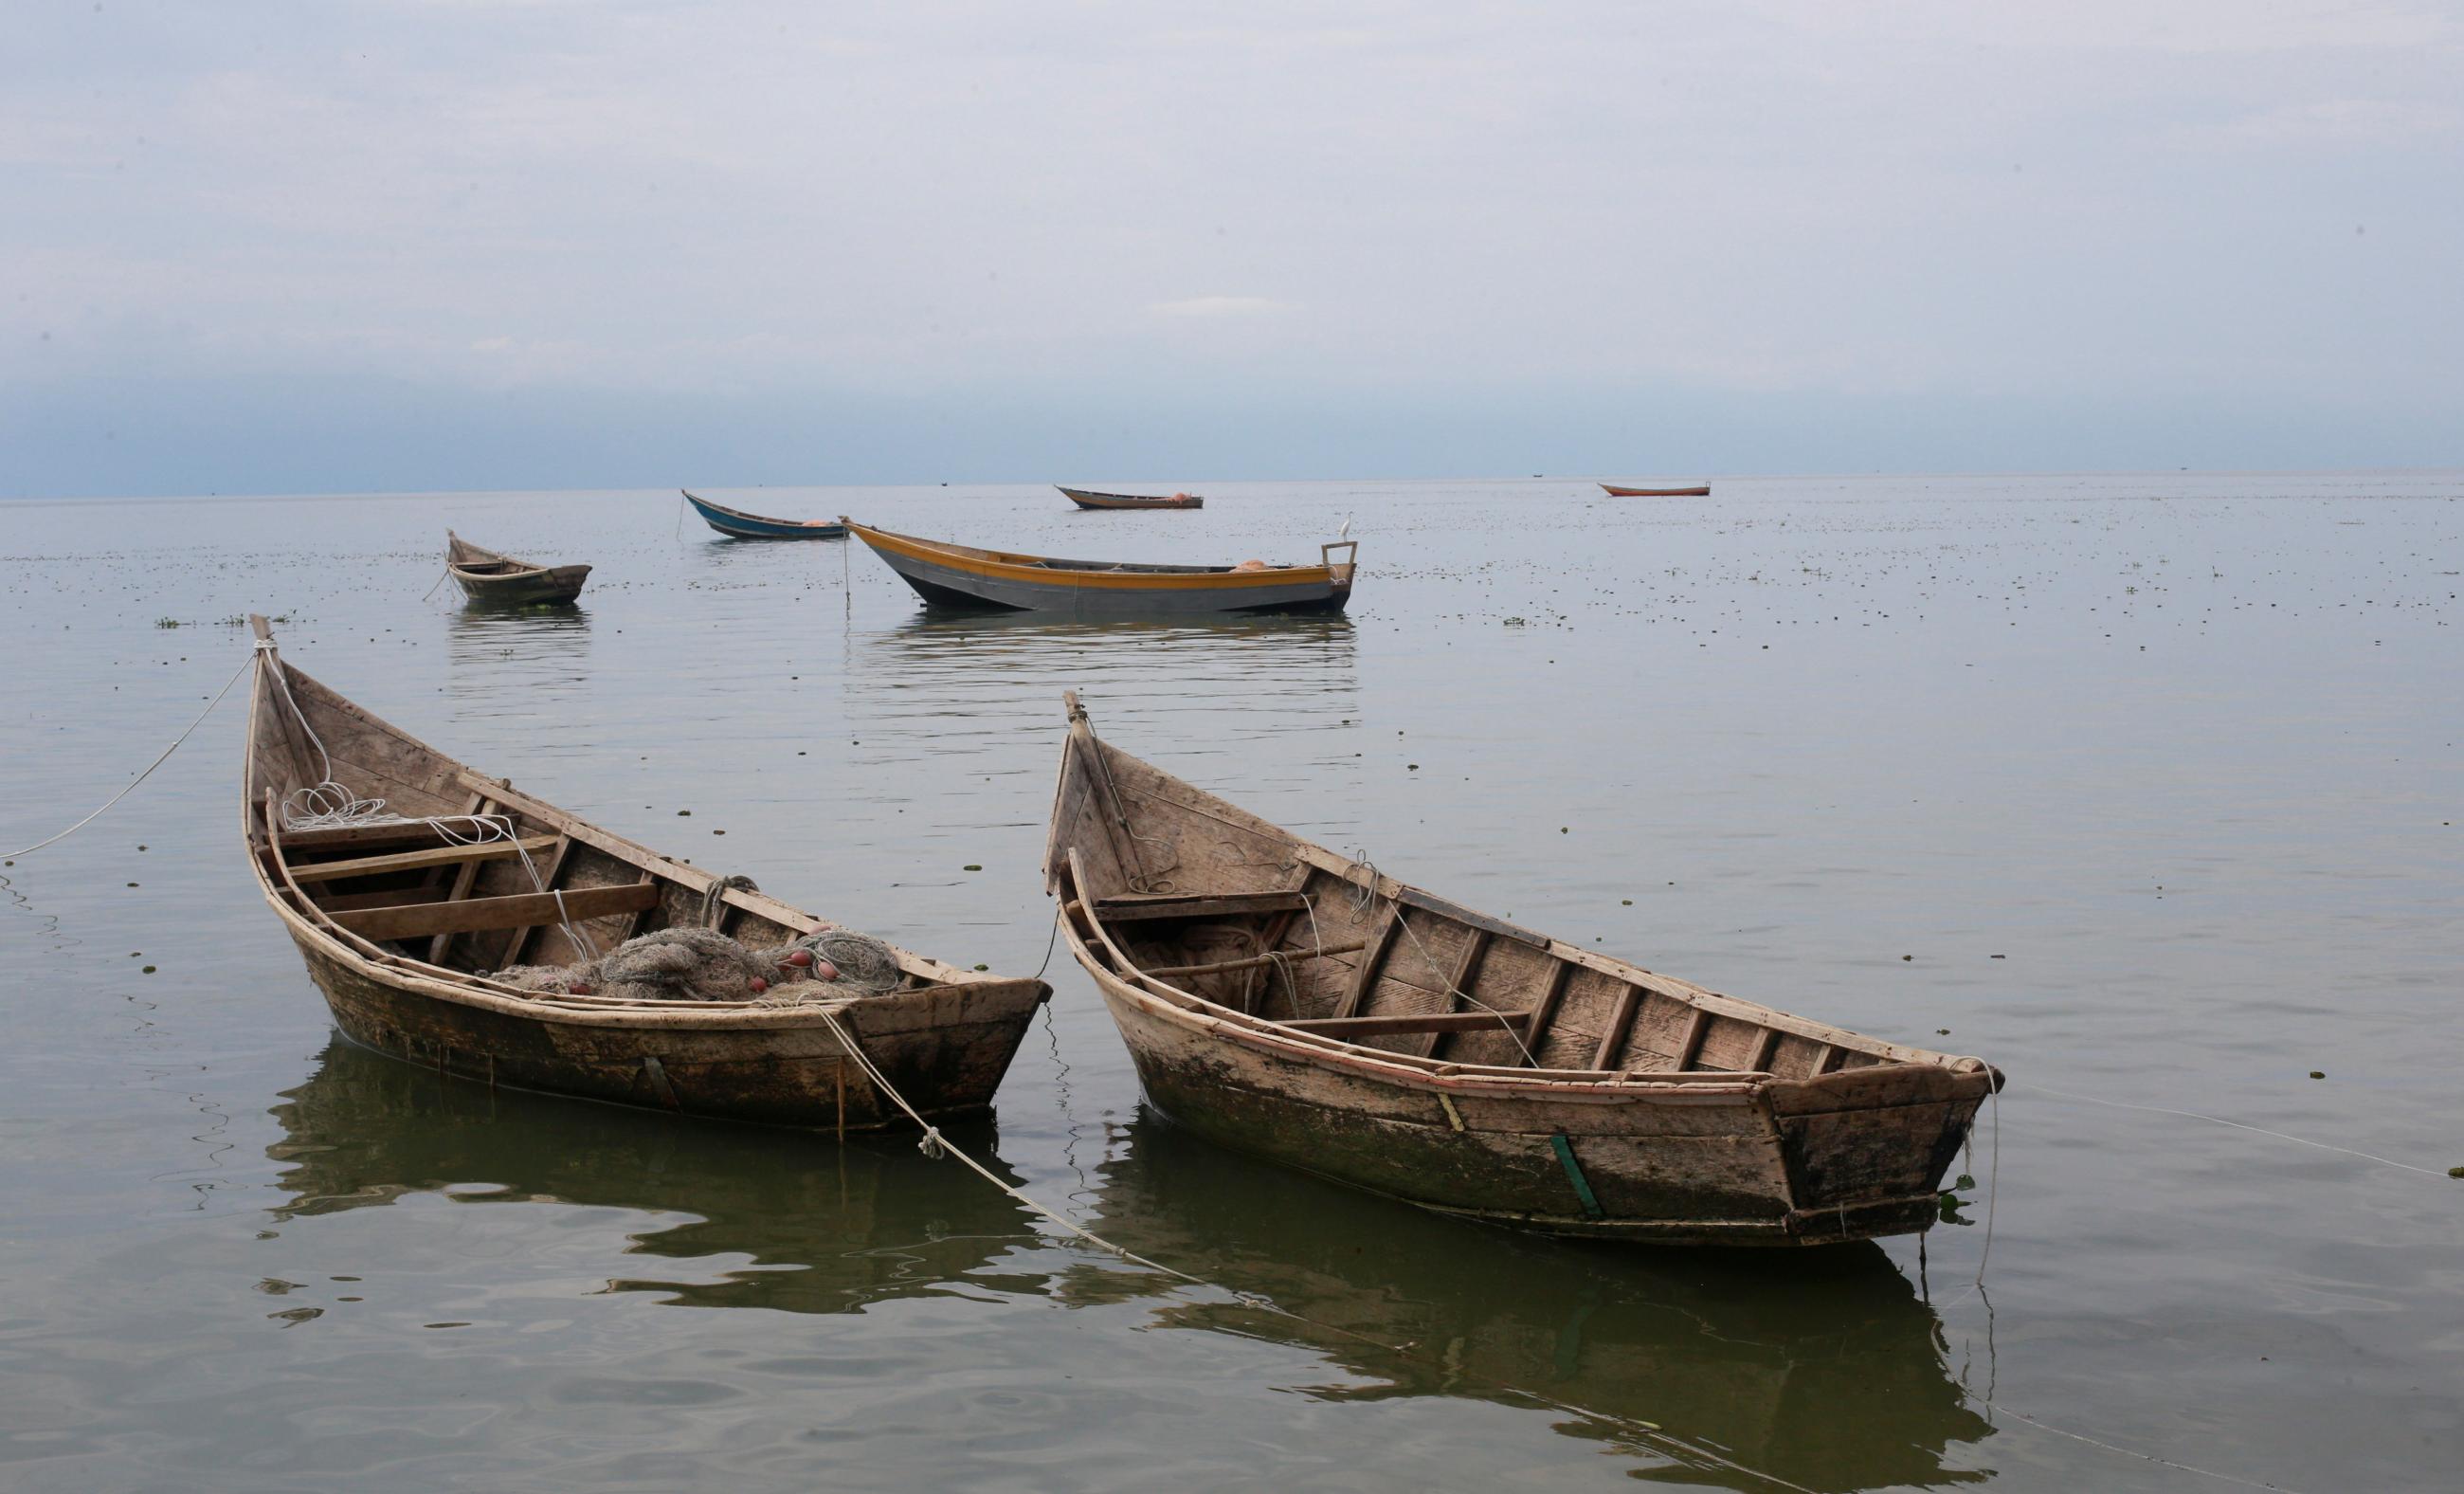 Fishing boats used by Congolese people fleeing ethnic fighting in the Democratic Republic of Congo float on the shore of Lake Albert, Uganda on March 19, 2018. REUTERS/James Akena